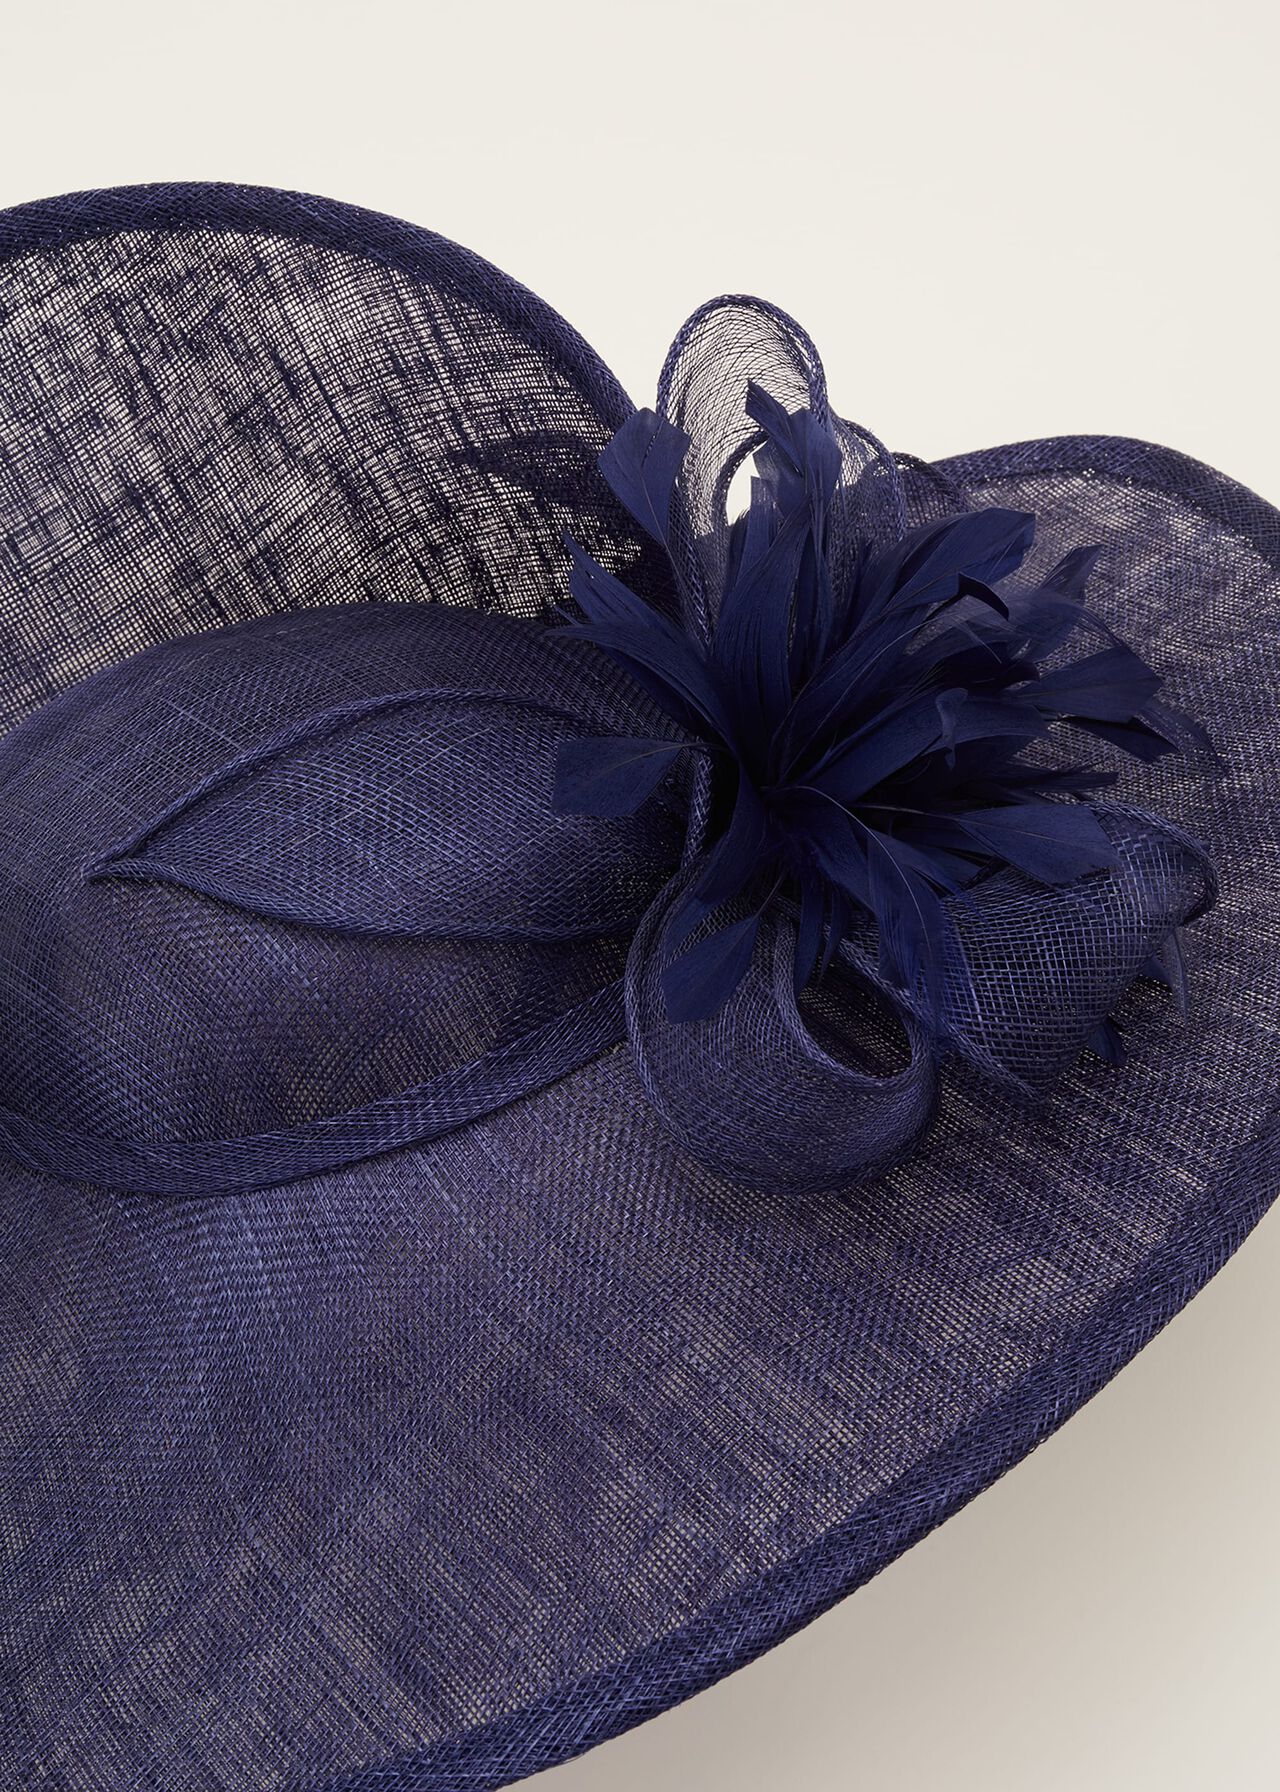 Trudy Large Disc Fascinator